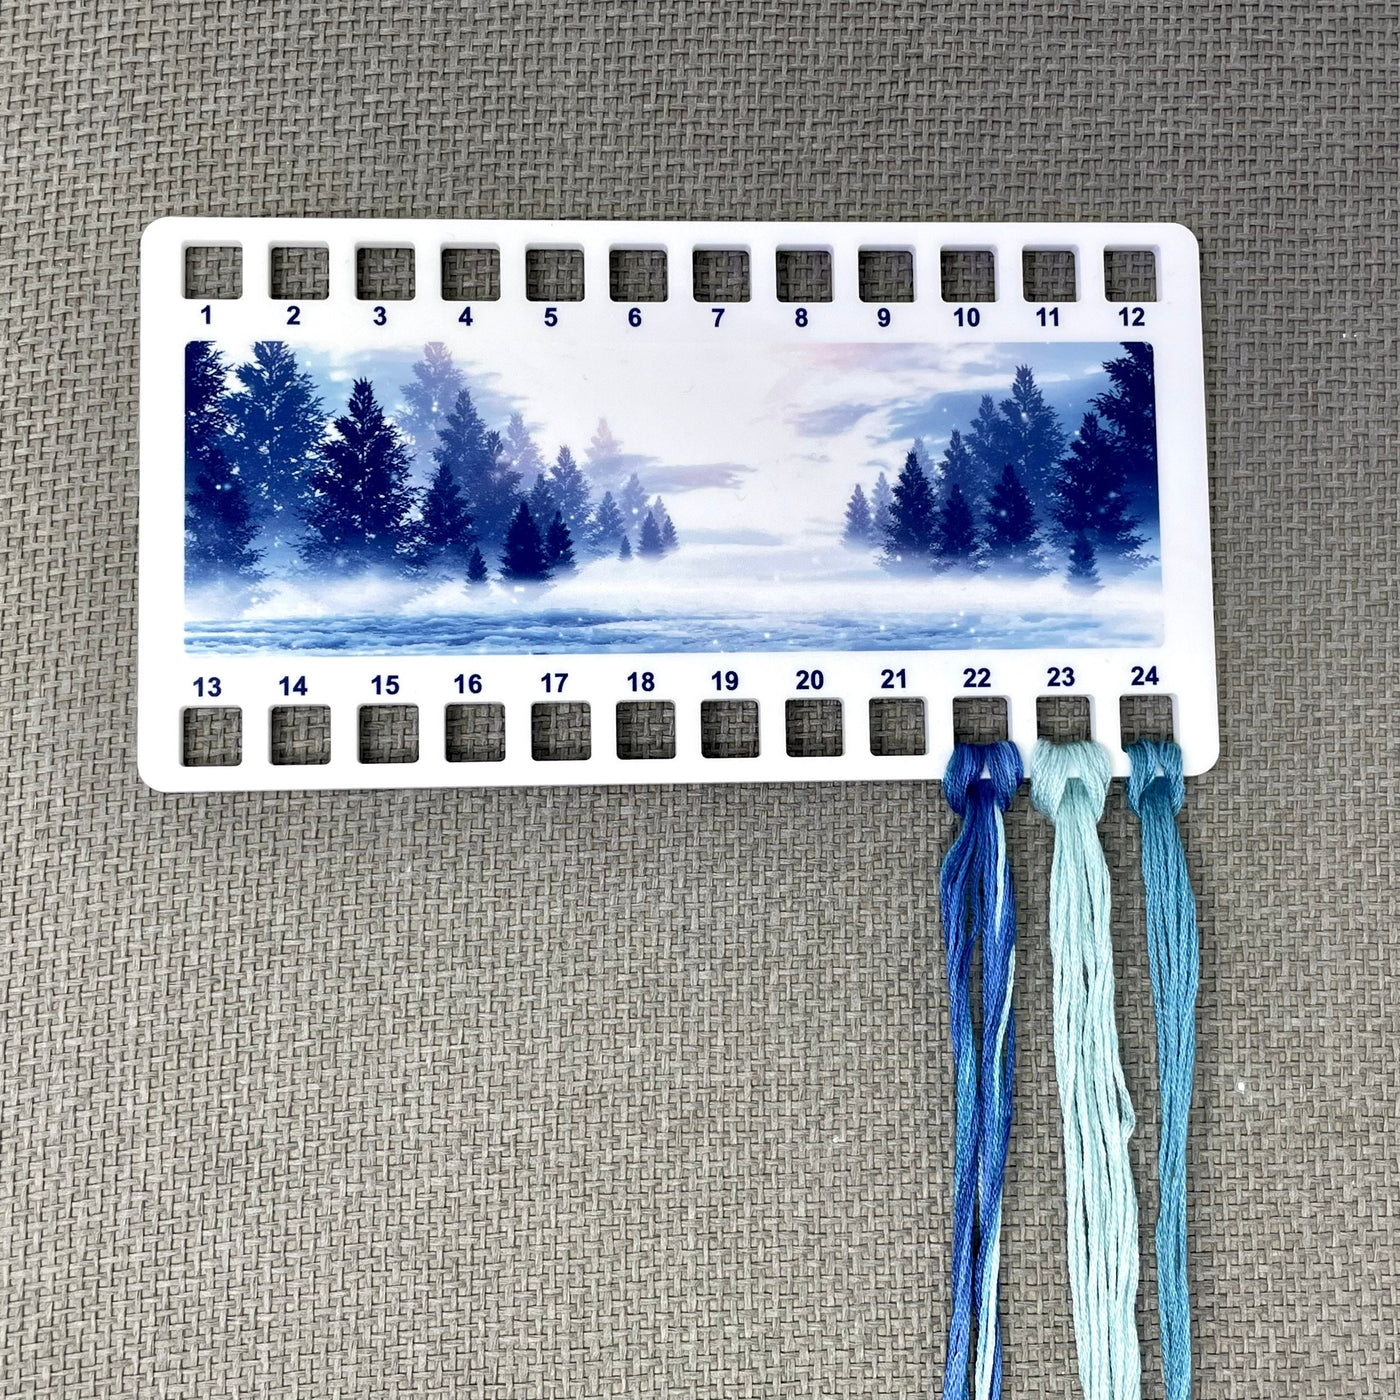 Winter landscape acrylic thread holder / floss organiser for cross stich and embroidery